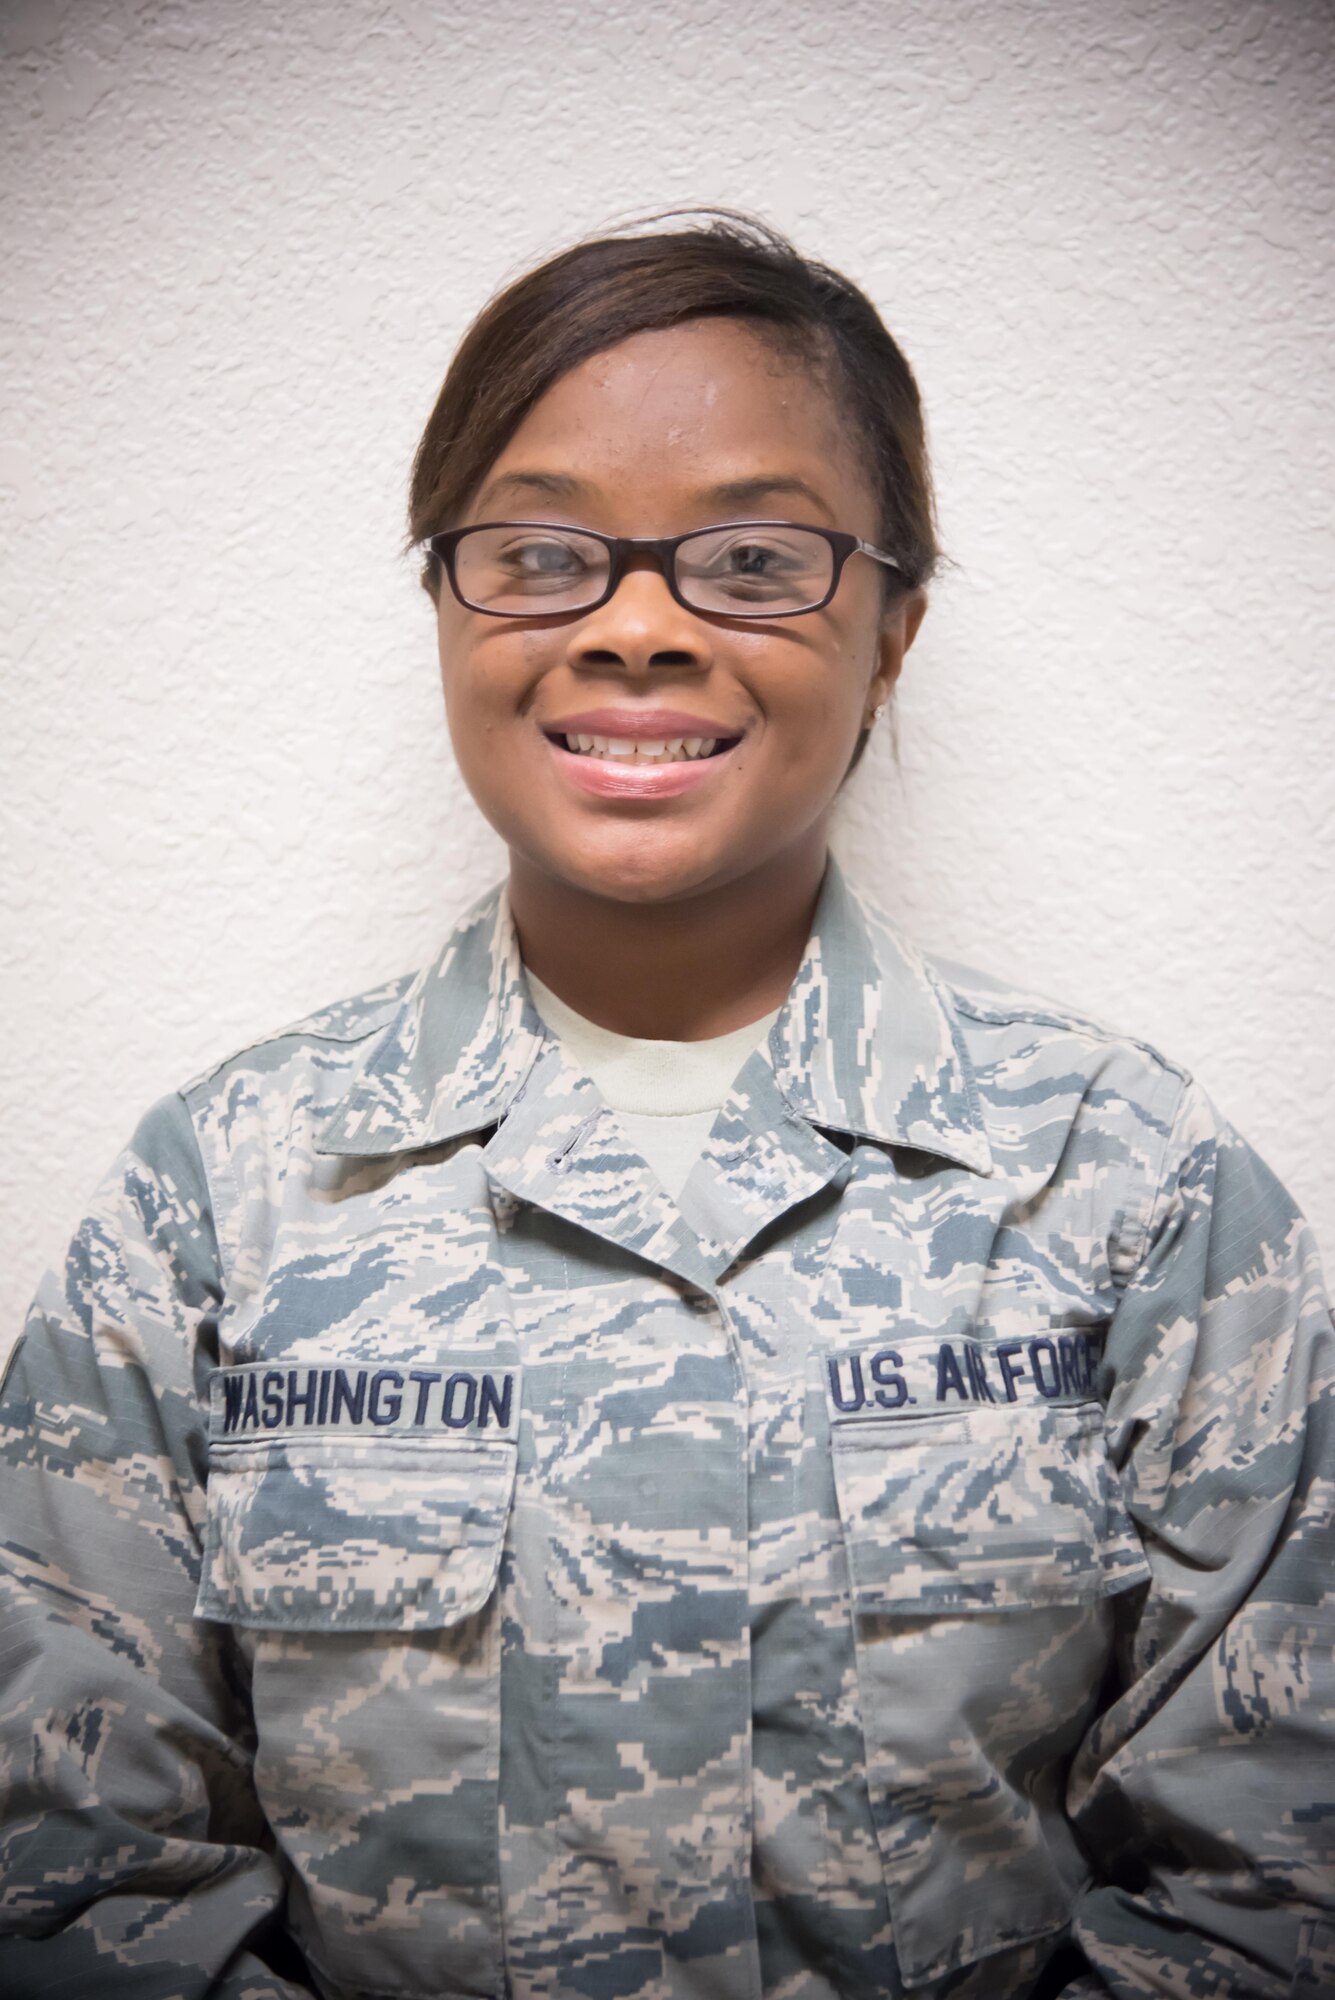 Senior Airman Shirlanna Washington, 403rd Force Support Squadron, poses for a photo after being named Airman of the Quarter June 2, 2017 at Keesler Air Force Base, Mississippi. (U.S. Air Force photo/Staff Sgt. Heather Heiney)